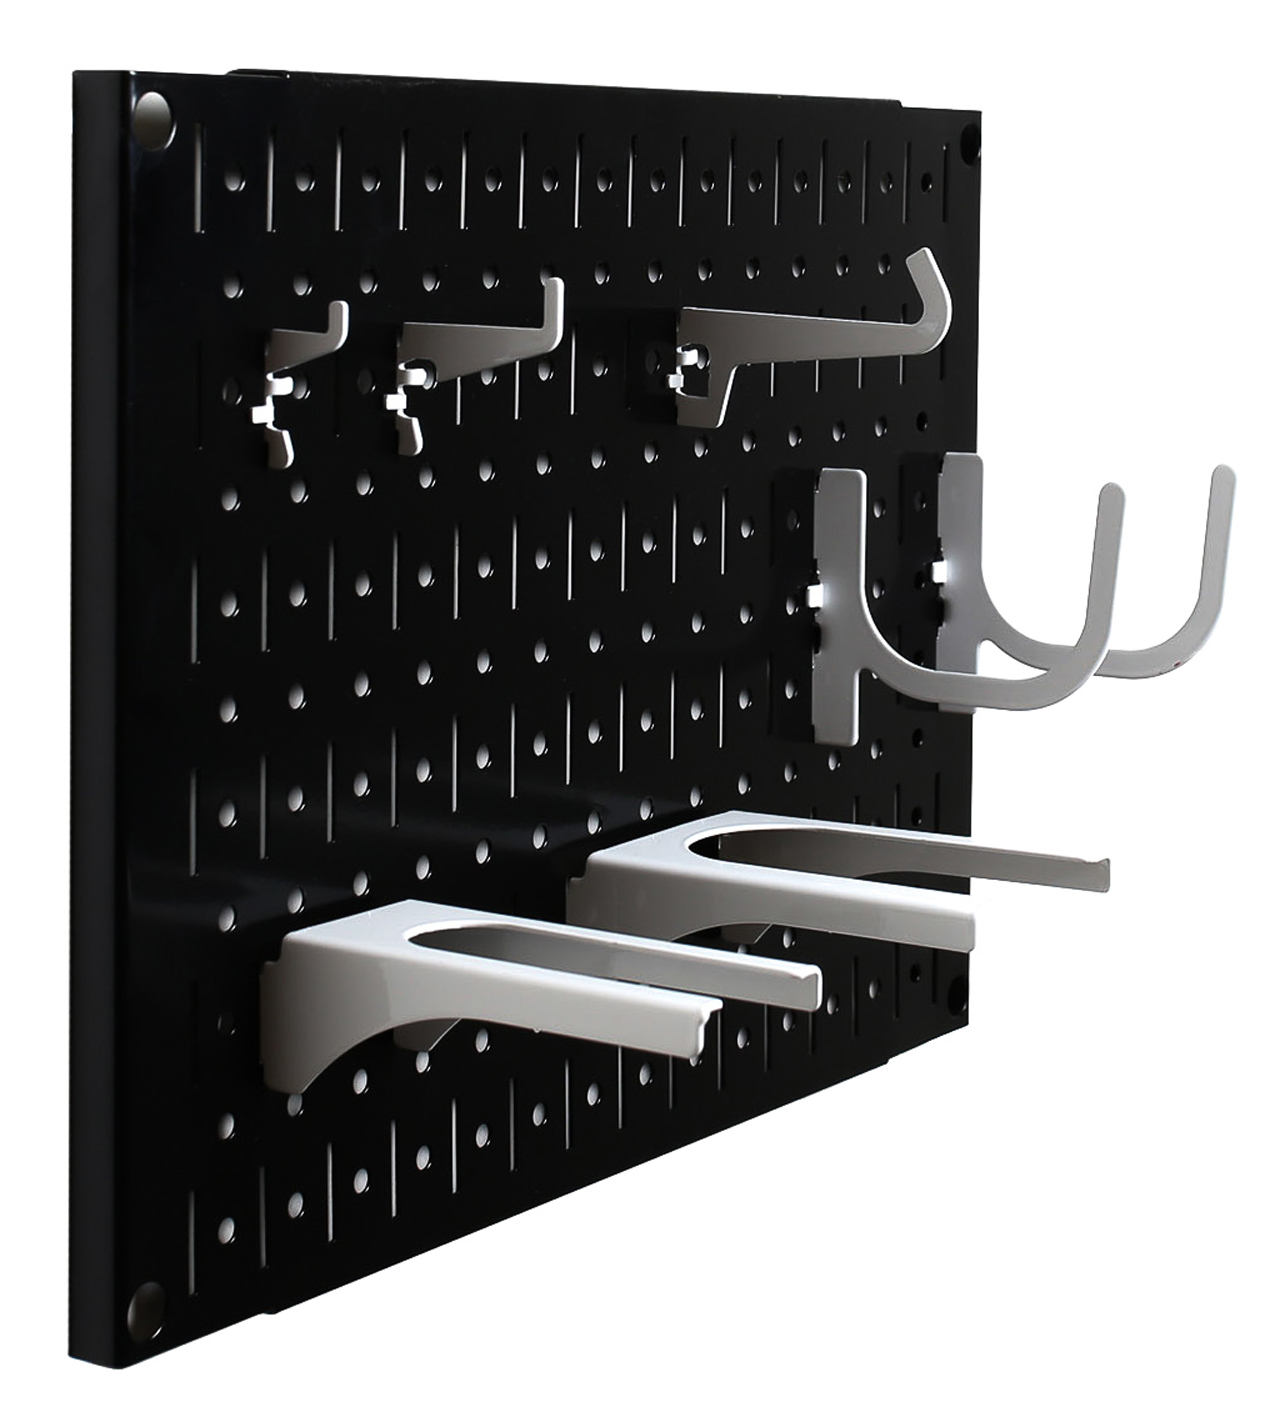 Pegboard Wall Organizer Tiles - Wall Control Modular Black Metal Pegboard Tiling Set - Four 12-Inch Tall x 16-Inch Wide Peg Board Panel Wall Storage Tiles - Easy to Install (Black) - image 5 of 11